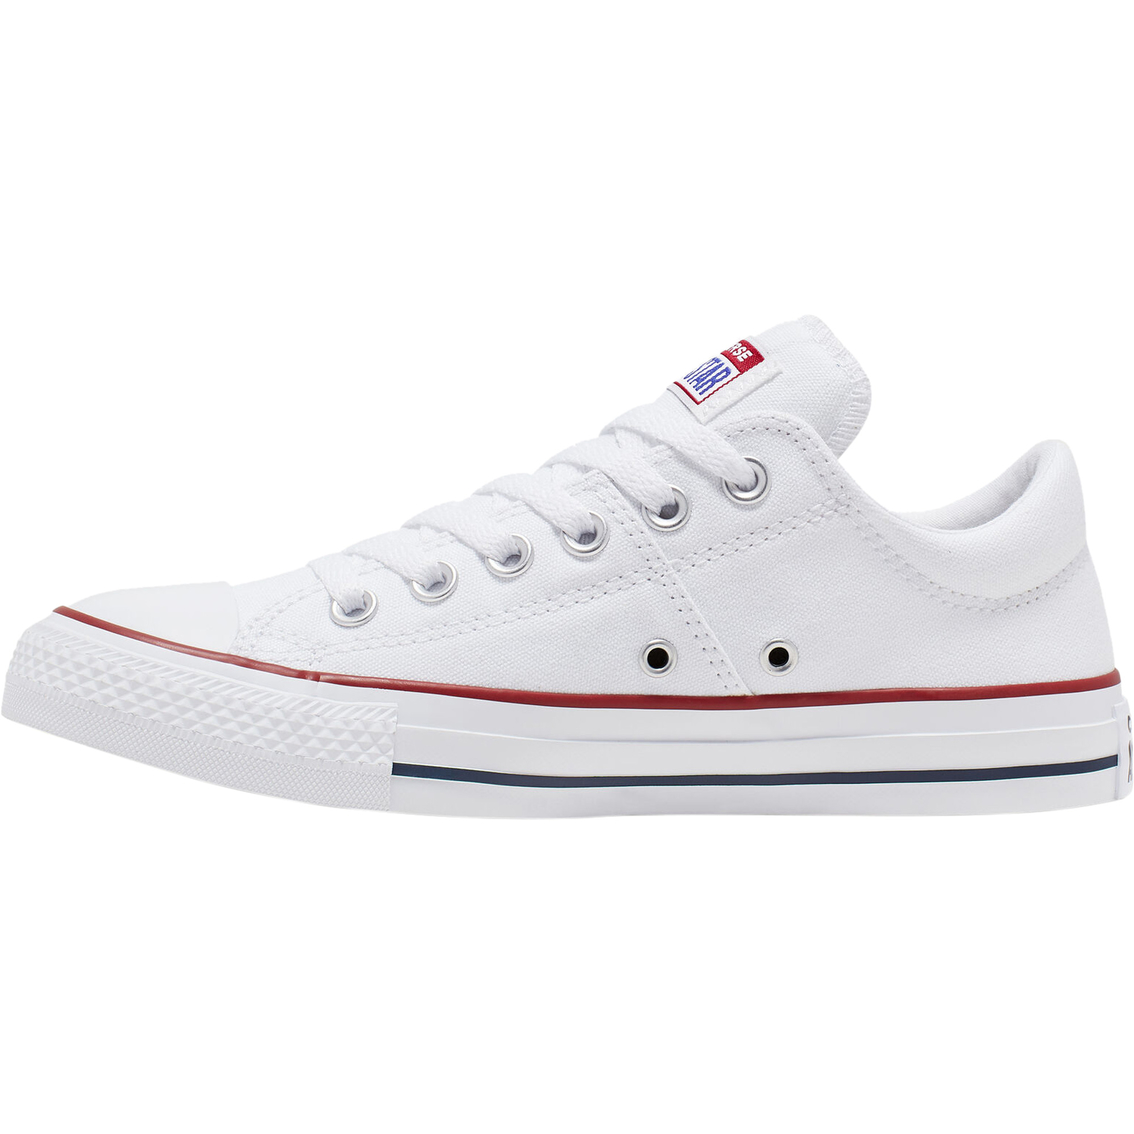 Converse Women's Chuck Taylor All Star Madison Low Top Sneakers - Image 3 of 7